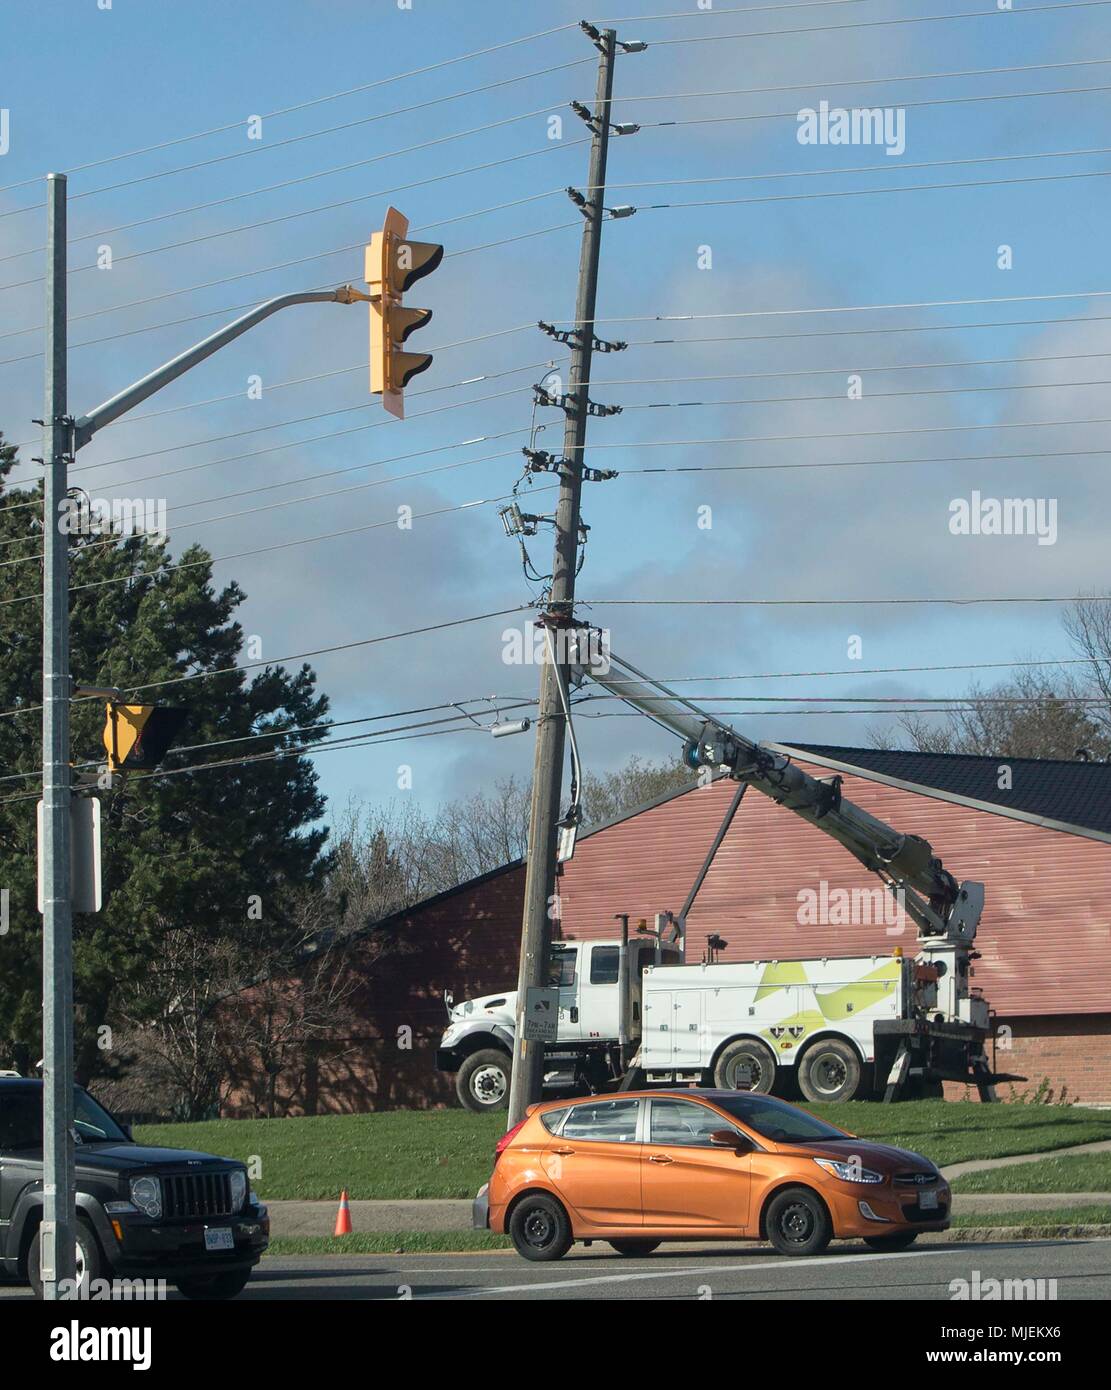 Toronto, Canada. 4th May, 2018. An electric rescue vehicle works on a hydro pole during high wind weather in Toronto, Canada, May 4, 2018. Environment Canada issued a weather alert for severe winds in the Toronto area on Friday, the wind climbed up to 100km/h in some areas. Credit: Zou Zheng/Xinhua/Alamy Live News Stock Photo